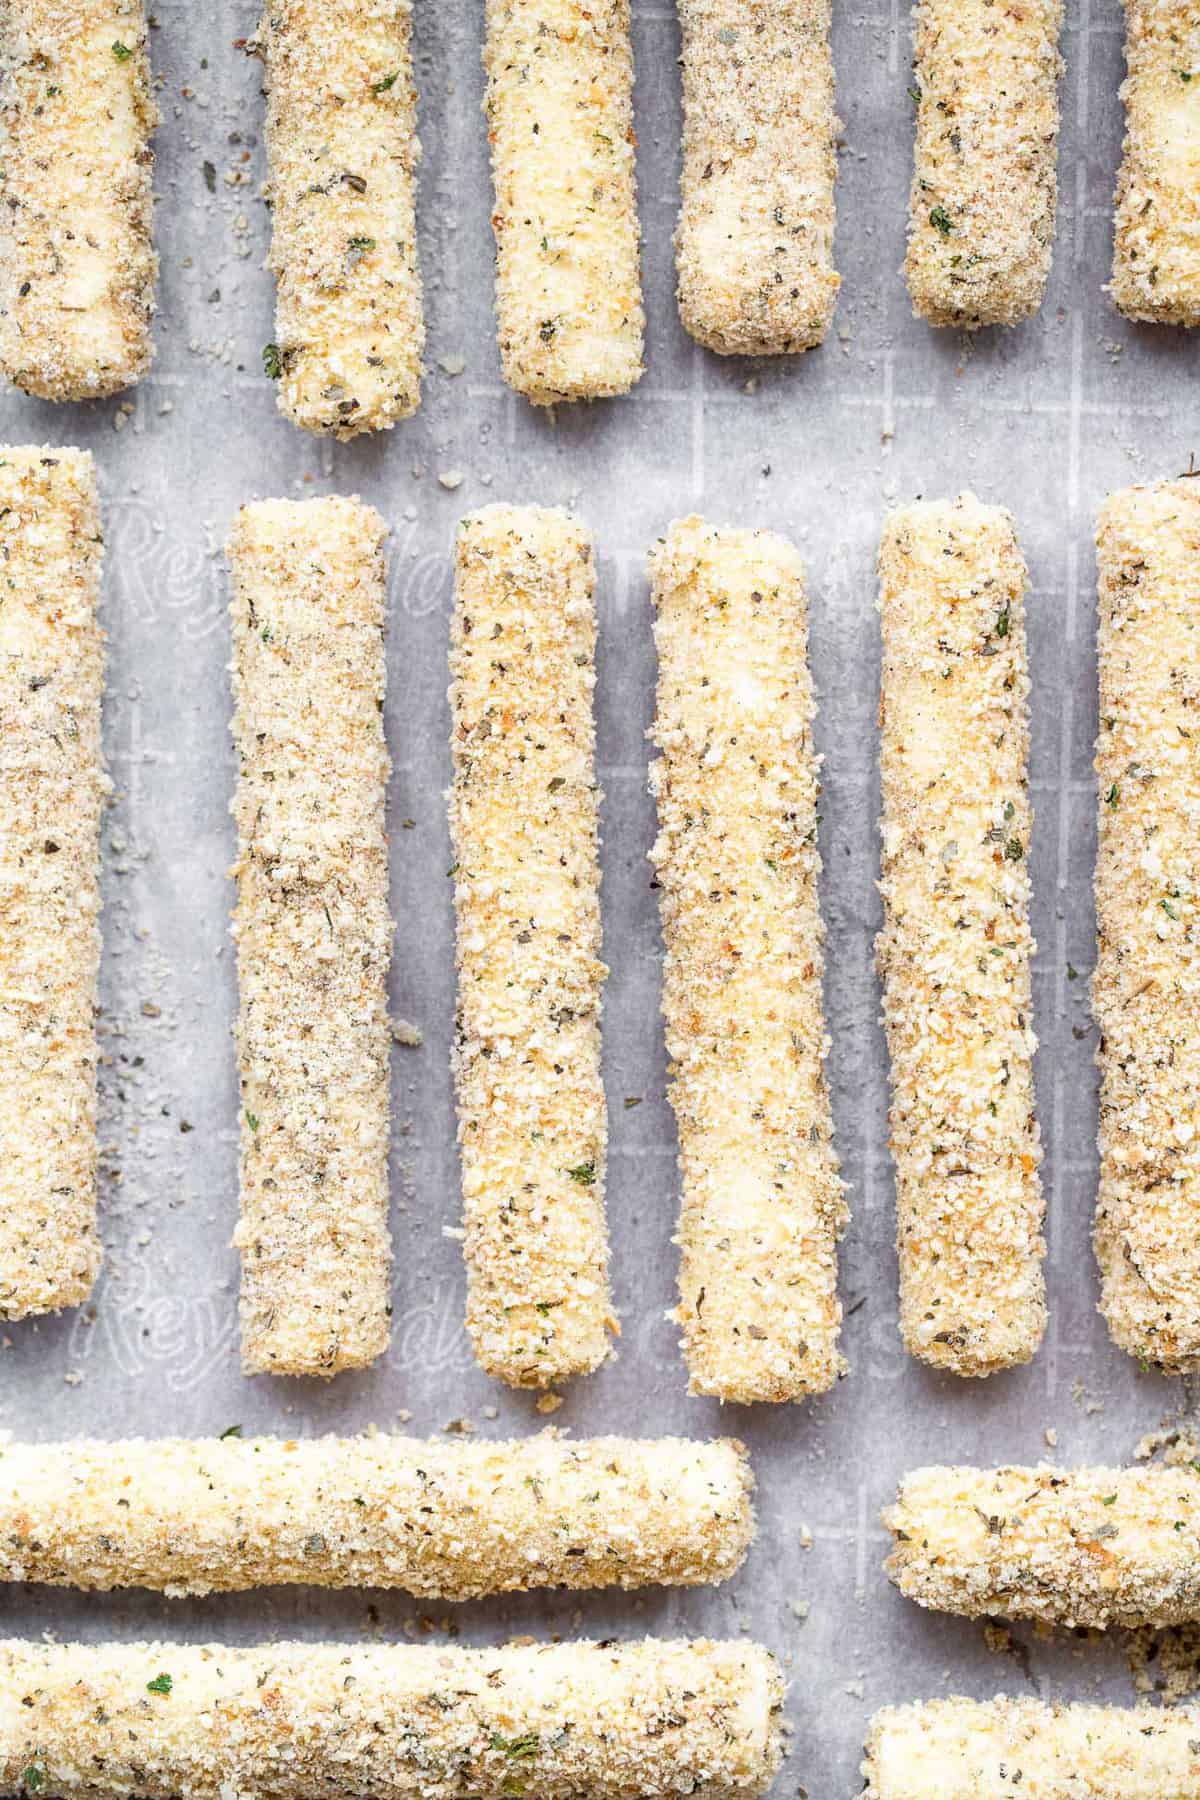 baked cheese sticks lined up on a baking sheet